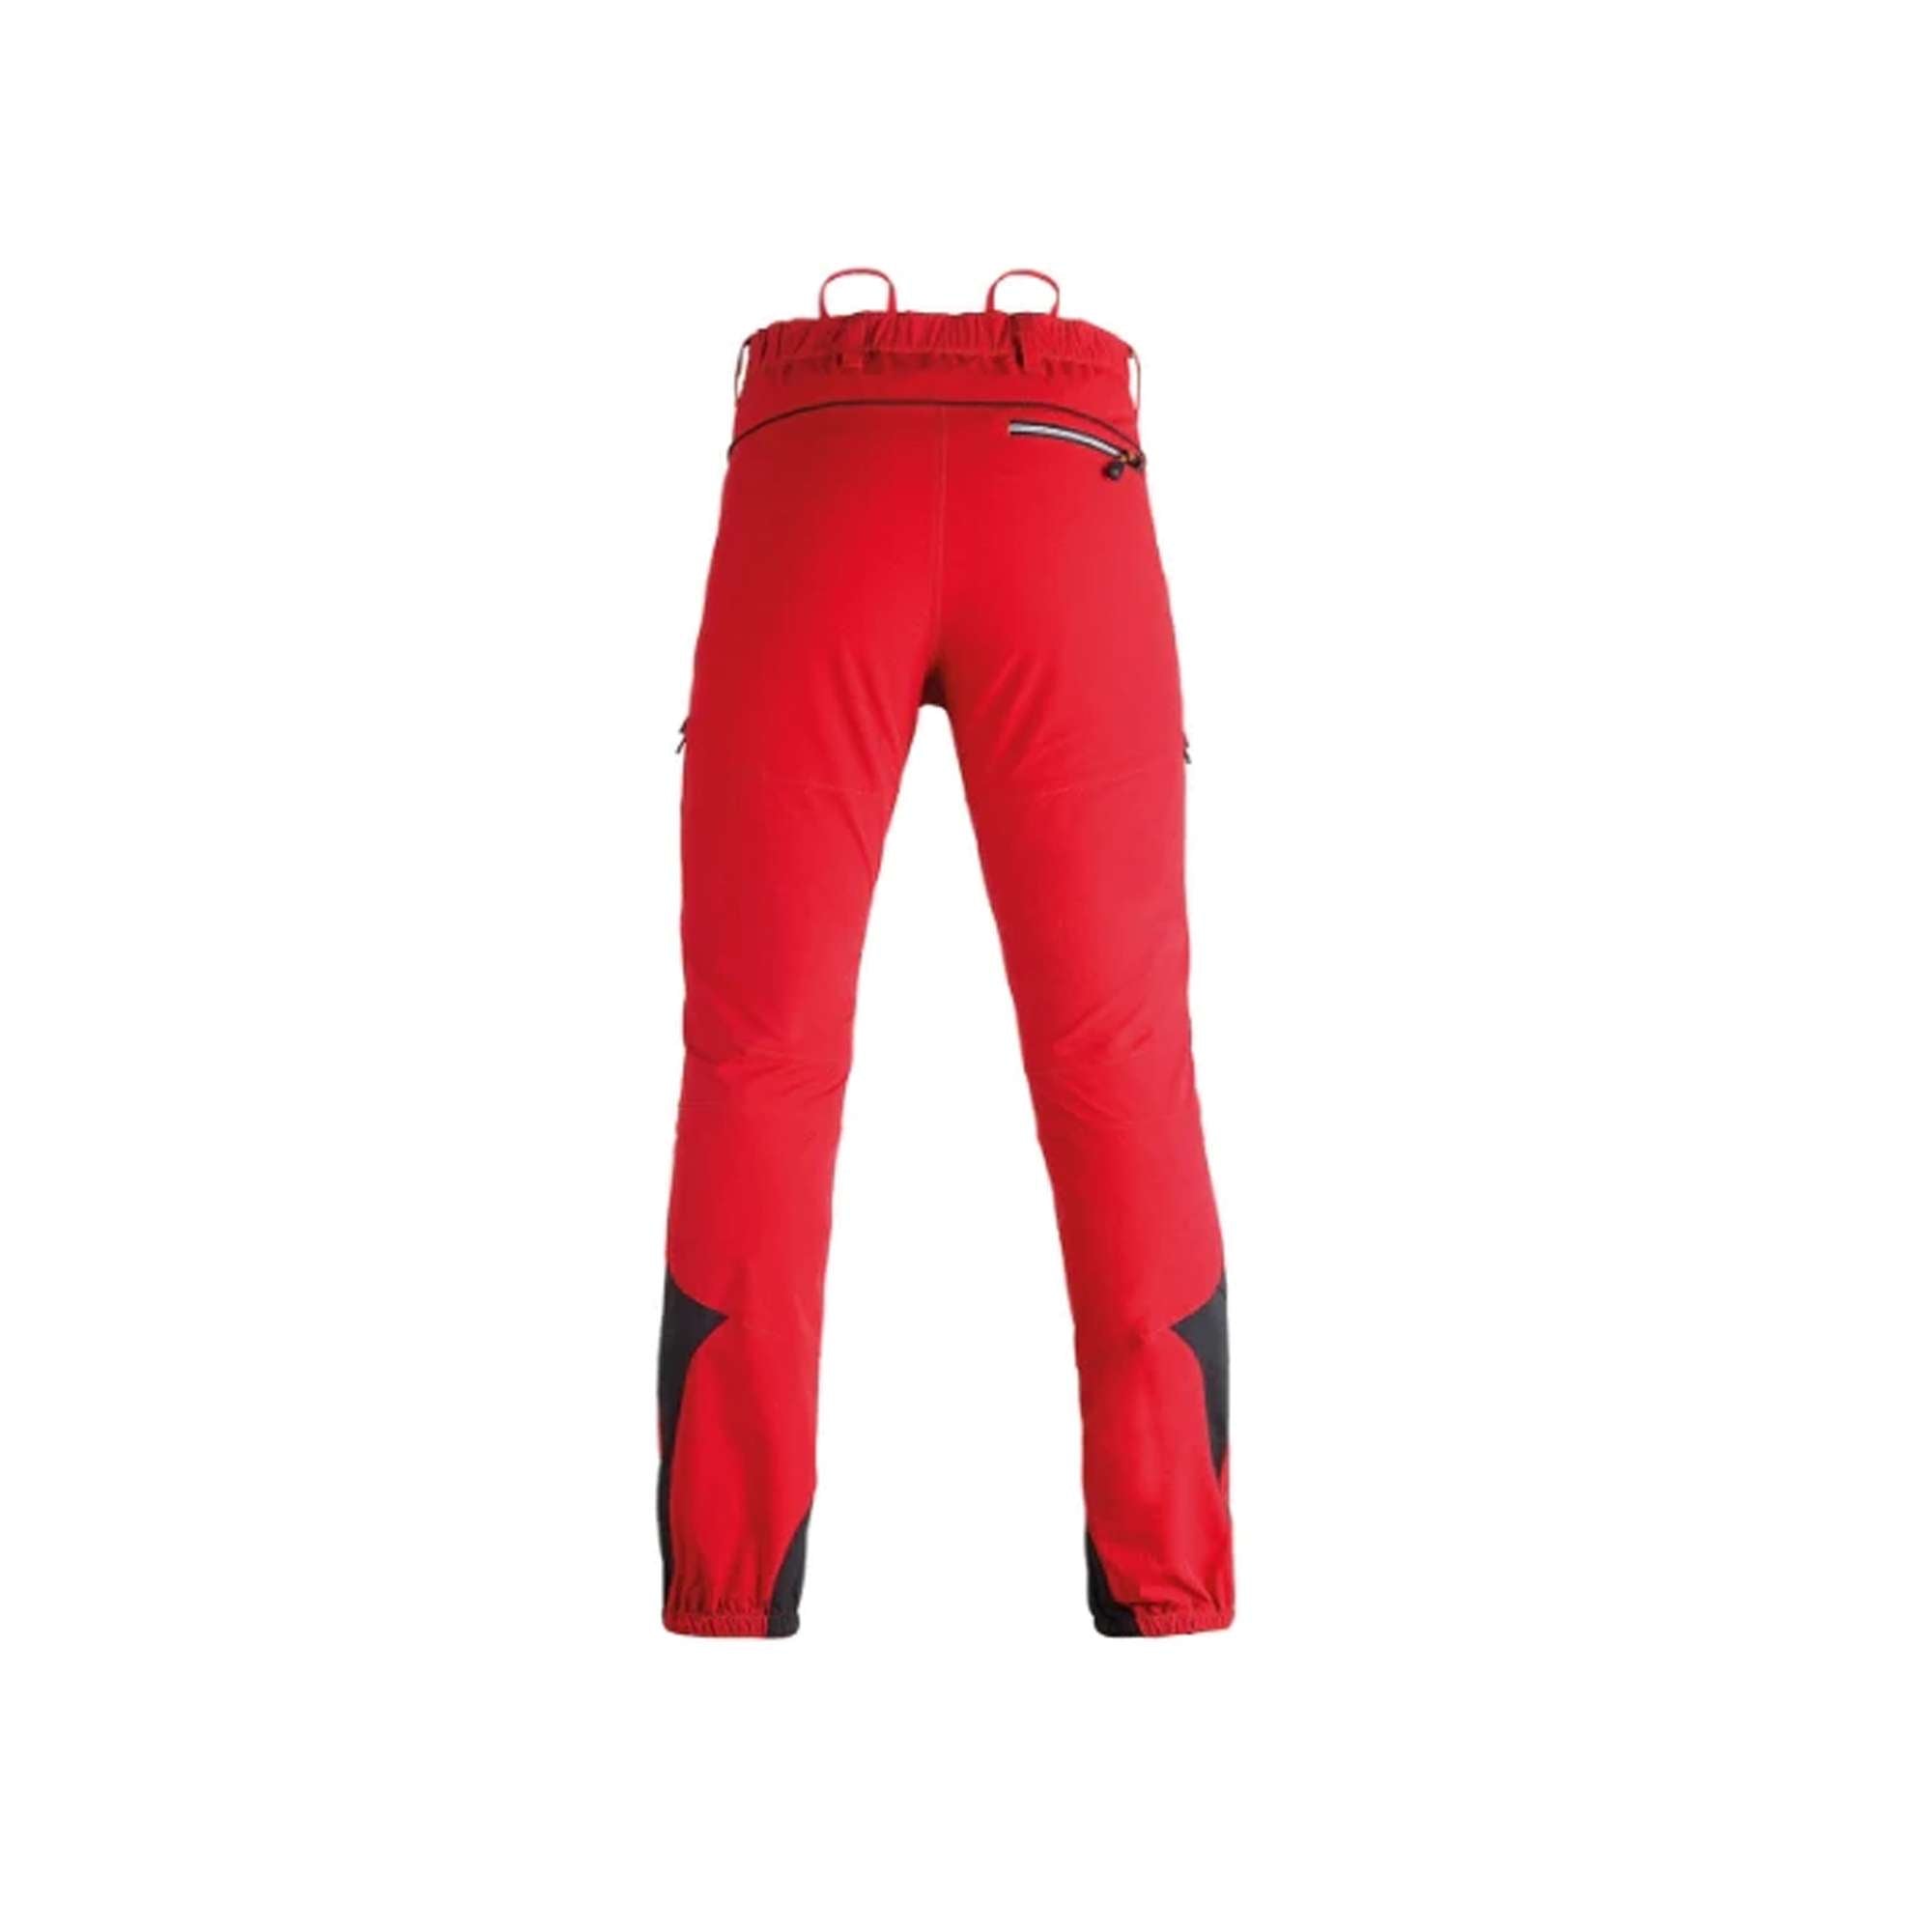 Work pants, stretch fabric and water repellent, Red color - Kapriol